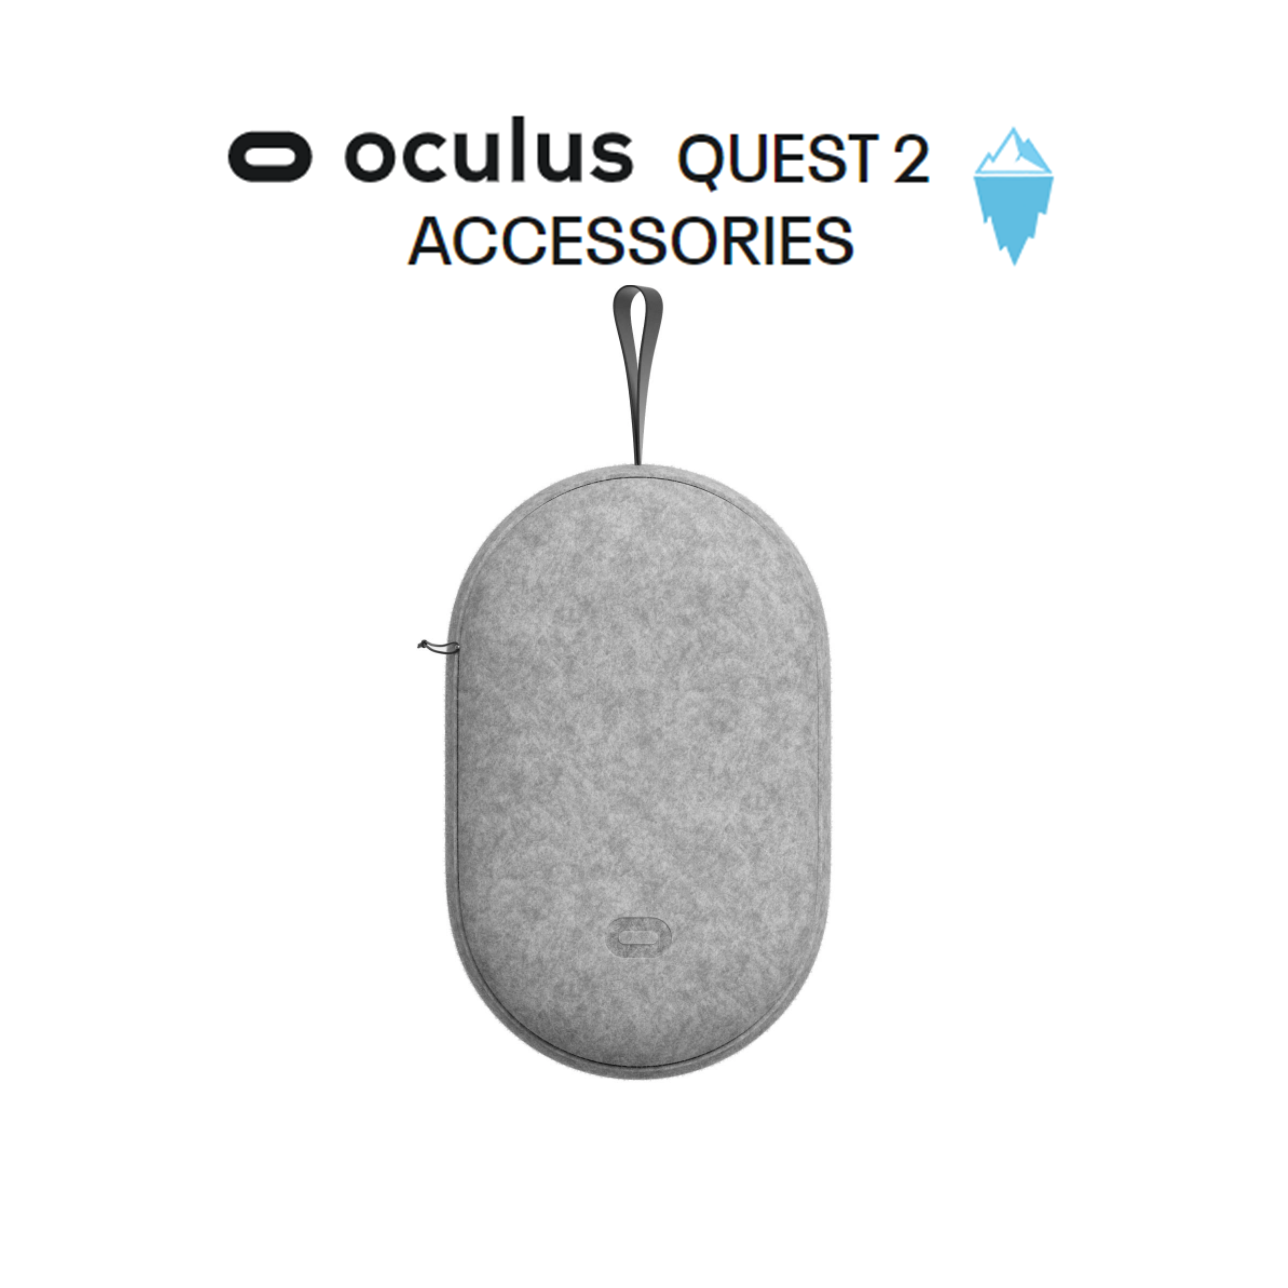 Oculus Quest 2 Accessories — Carrying Case